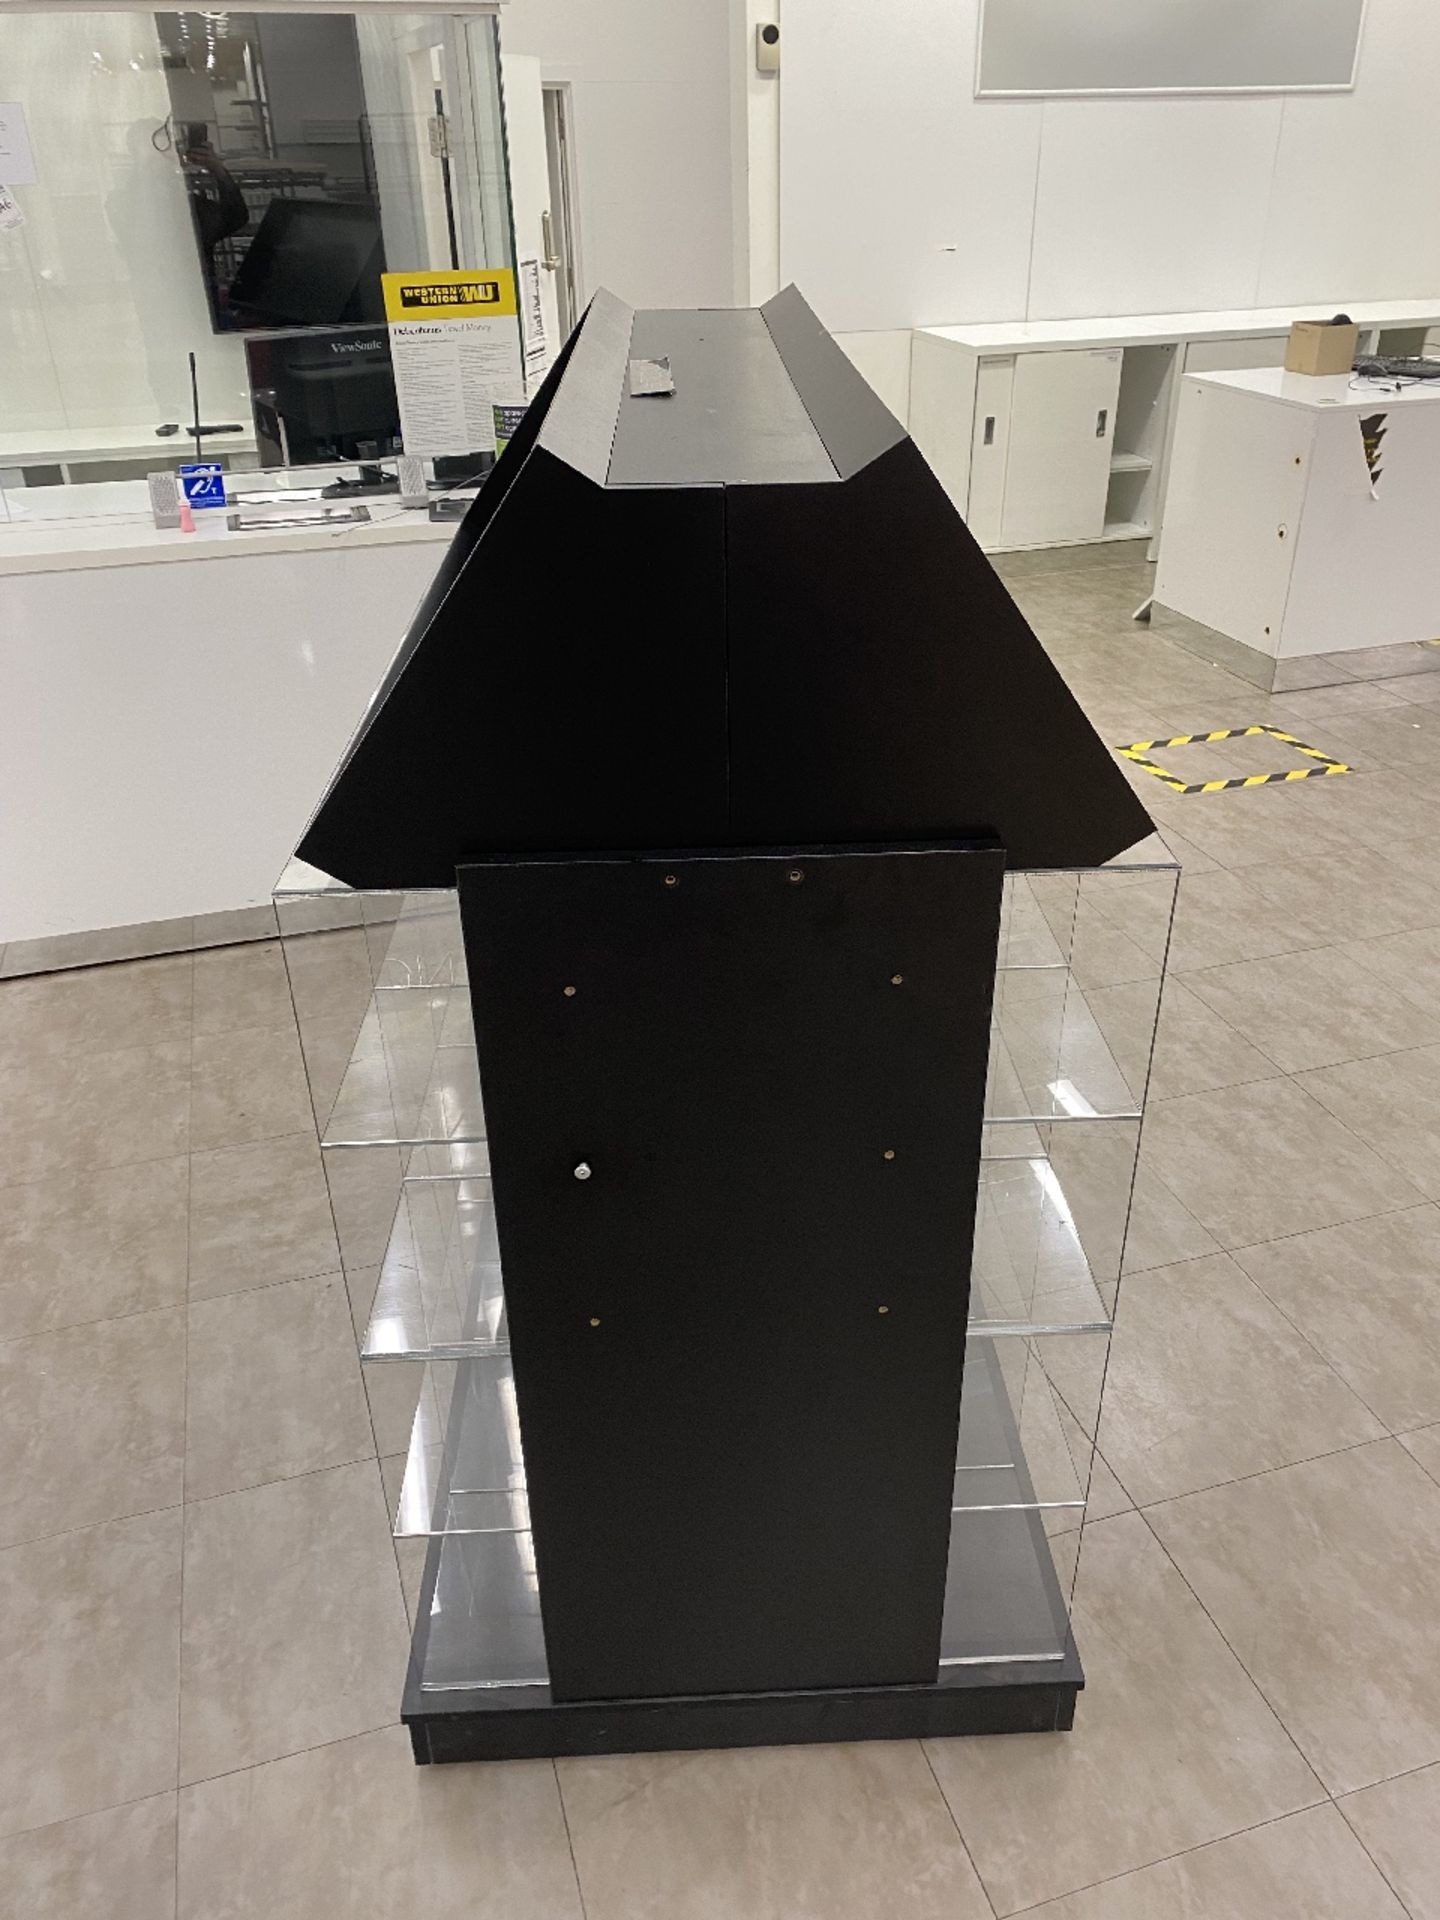 Retail dual sided display unit - Image 3 of 3